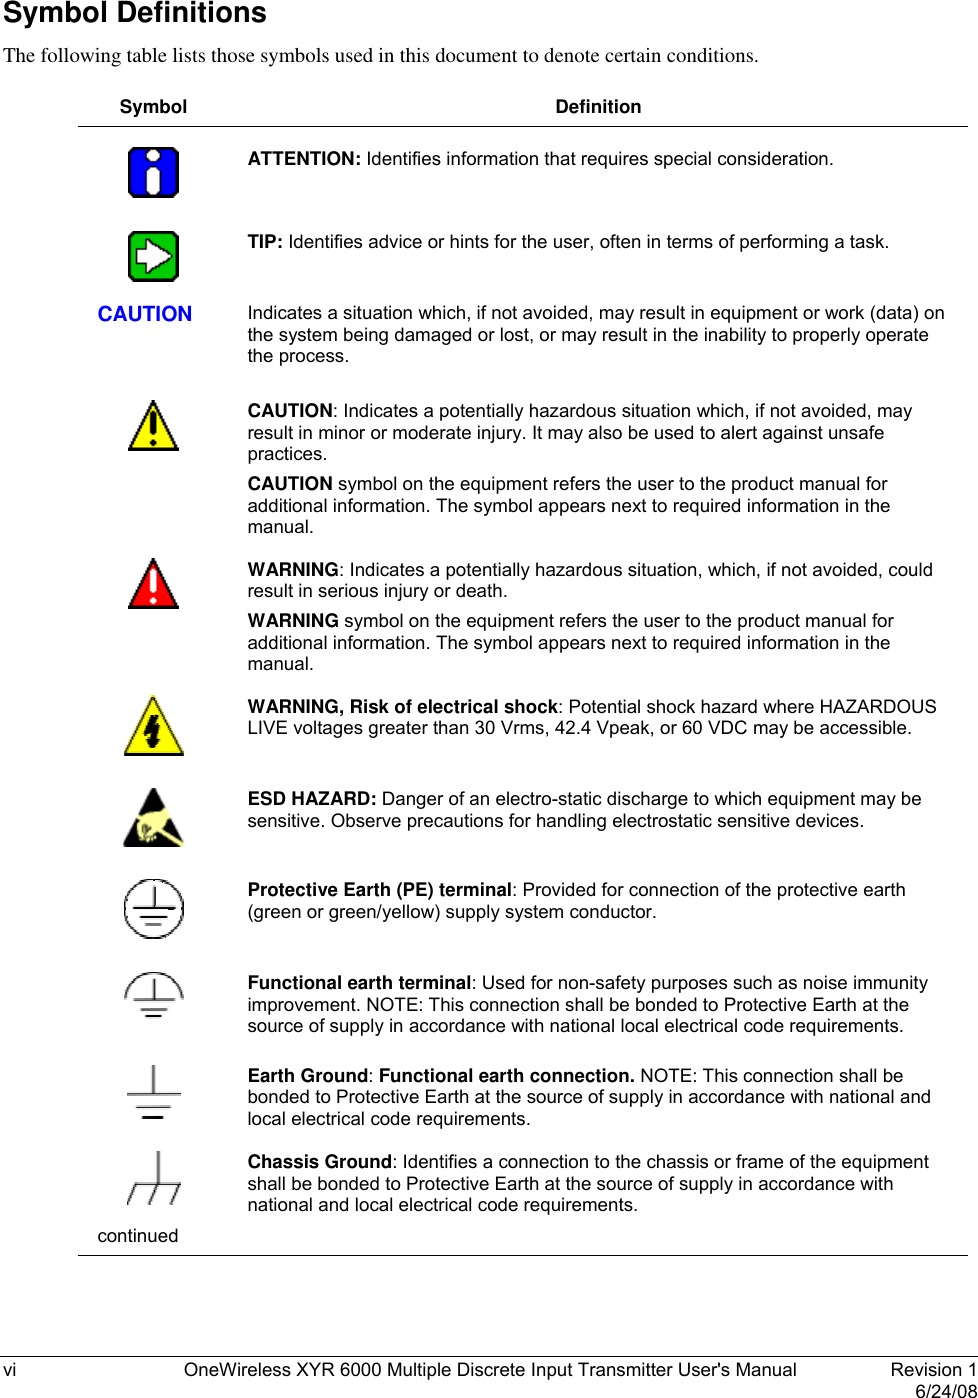  vi  OneWireless XYR 6000 Multiple Discrete Input Transmitter User&apos;s Manual   Revision 1   6/24/08 Symbol Definitions The following table lists those symbols used in this document to denote certain conditions.  Symbol Definition     ATTENTION: Identifies information that requires special consideration.     TIP: Identifies advice or hints for the user, often in terms of performing a task.   CAUTION  Indicates a situation which, if not avoided, may result in equipment or work (data) on the system being damaged or lost, or may result in the inability to properly operate the process.      CAUTION: Indicates a potentially hazardous situation which, if not avoided, may result in minor or moderate injury. It may also be used to alert against unsafe practices.  CAUTION symbol on the equipment refers the user to the product manual for additional information. The symbol appears next to required information in the manual.     WARNING: Indicates a potentially hazardous situation, which, if not avoided, could result in serious injury or death. WARNING symbol on the equipment refers the user to the product manual for additional information. The symbol appears next to required information in the manual.     WARNING, Risk of electrical shock: Potential shock hazard where HAZARDOUS LIVE voltages greater than 30 Vrms, 42.4 Vpeak, or 60 VDC may be accessible.     ESD HAZARD: Danger of an electro-static discharge to which equipment may be sensitive. Observe precautions for handling electrostatic sensitive devices.     Protective Earth (PE) terminal: Provided for connection of the protective earth (green or green/yellow) supply system conductor.     Functional earth terminal: Used for non-safety purposes such as noise immunity improvement. NOTE: This connection shall be bonded to Protective Earth at the source of supply in accordance with national local electrical code requirements.     Earth Ground: Functional earth connection. NOTE: This connection shall be bonded to Protective Earth at the source of supply in accordance with national and local electrical code requirements.     Chassis Ground: Identifies a connection to the chassis or frame of the equipment shall be bonded to Protective Earth at the source of supply in accordance with national and local electrical code requirements. continued    